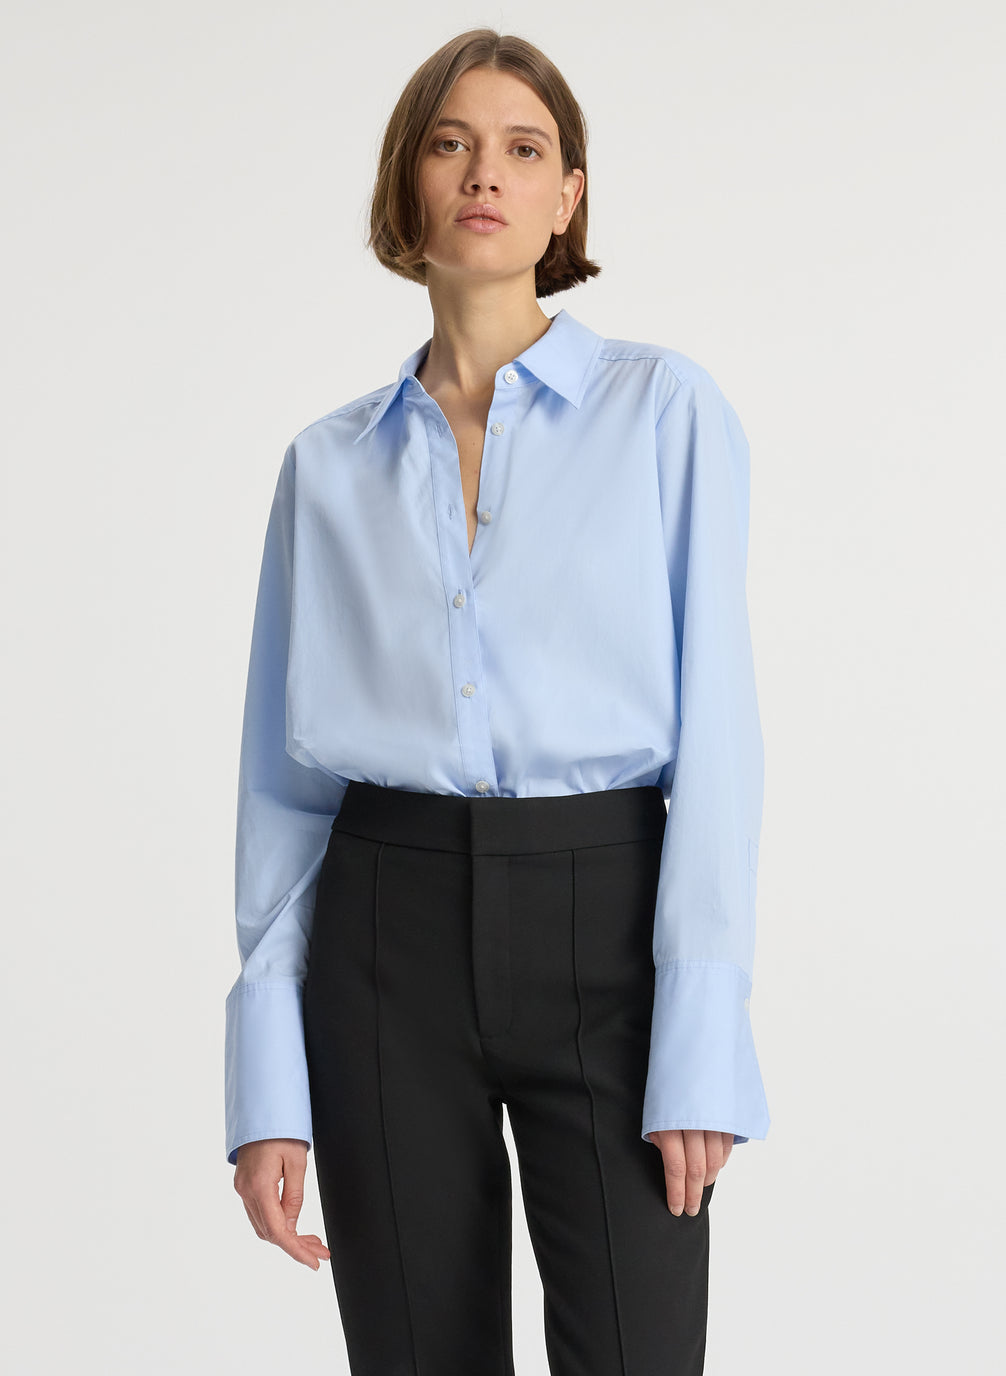 detail view of woman wearing light blue button down collared shirt and black ankle length pants